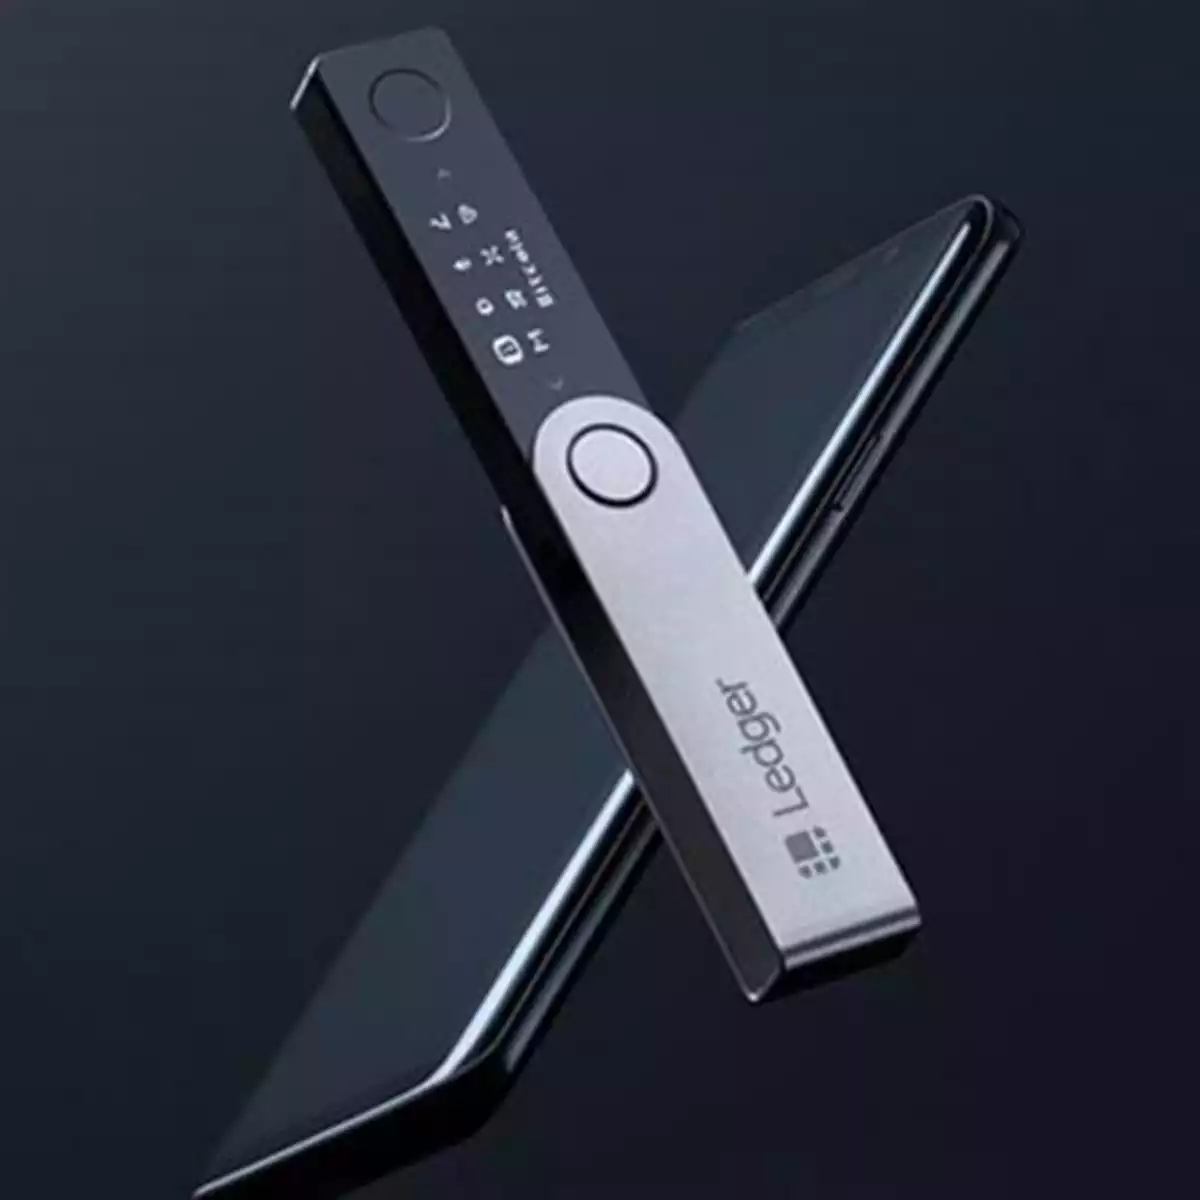 ledger nano x hardware wallet  protect your cryptocurrency wherever you go with ledgers' most advanced hardware wallet to date. it provides state of t...